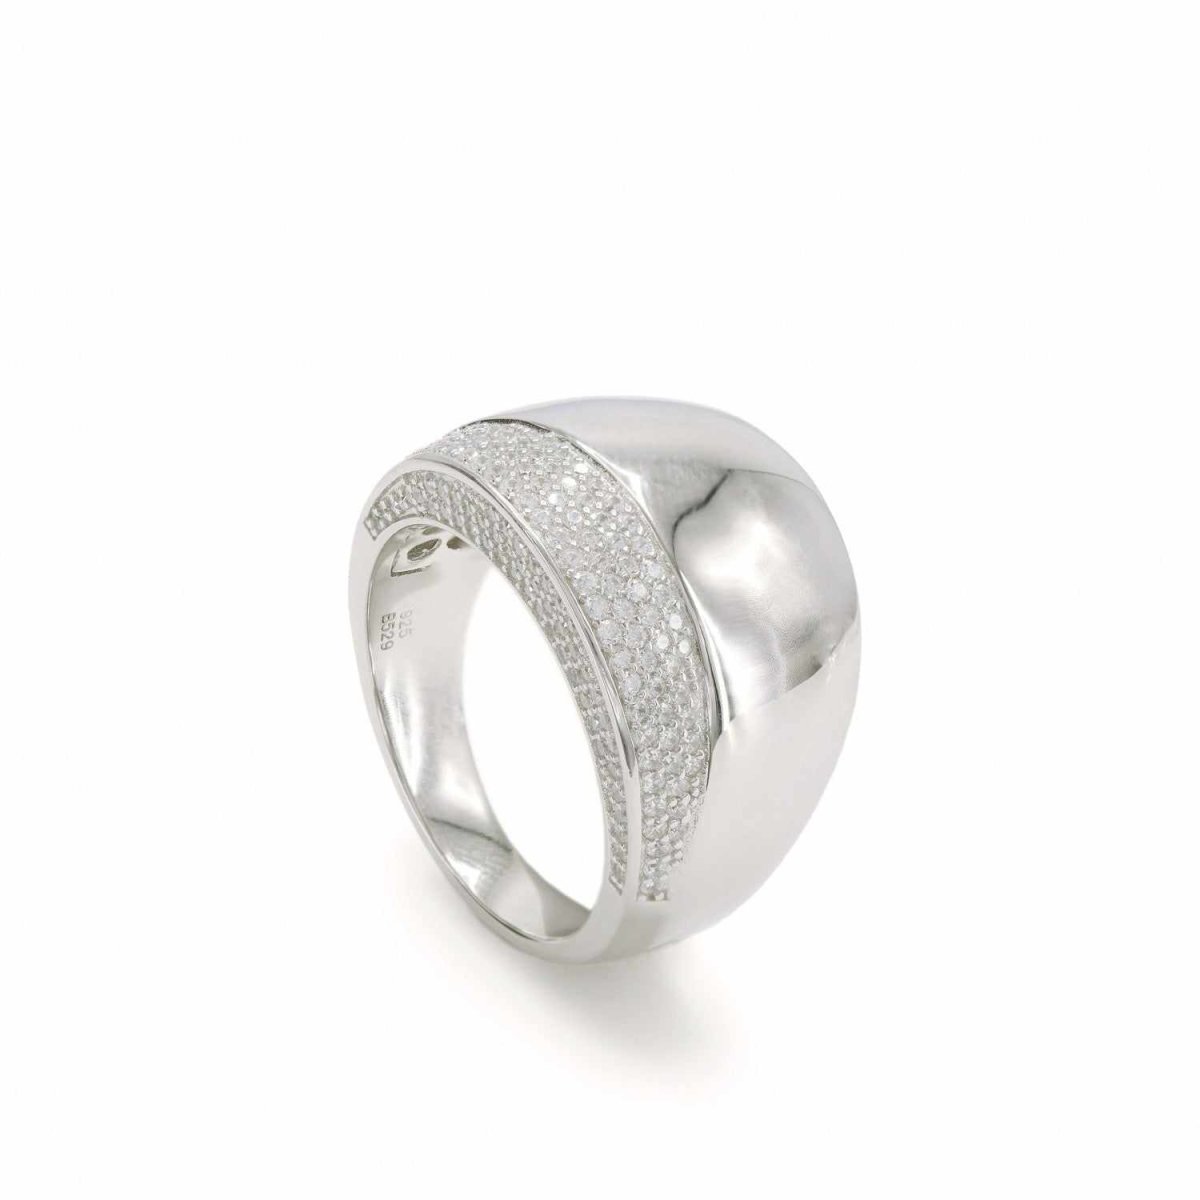 Ring - Wide rings in sterling silver and zirconia design